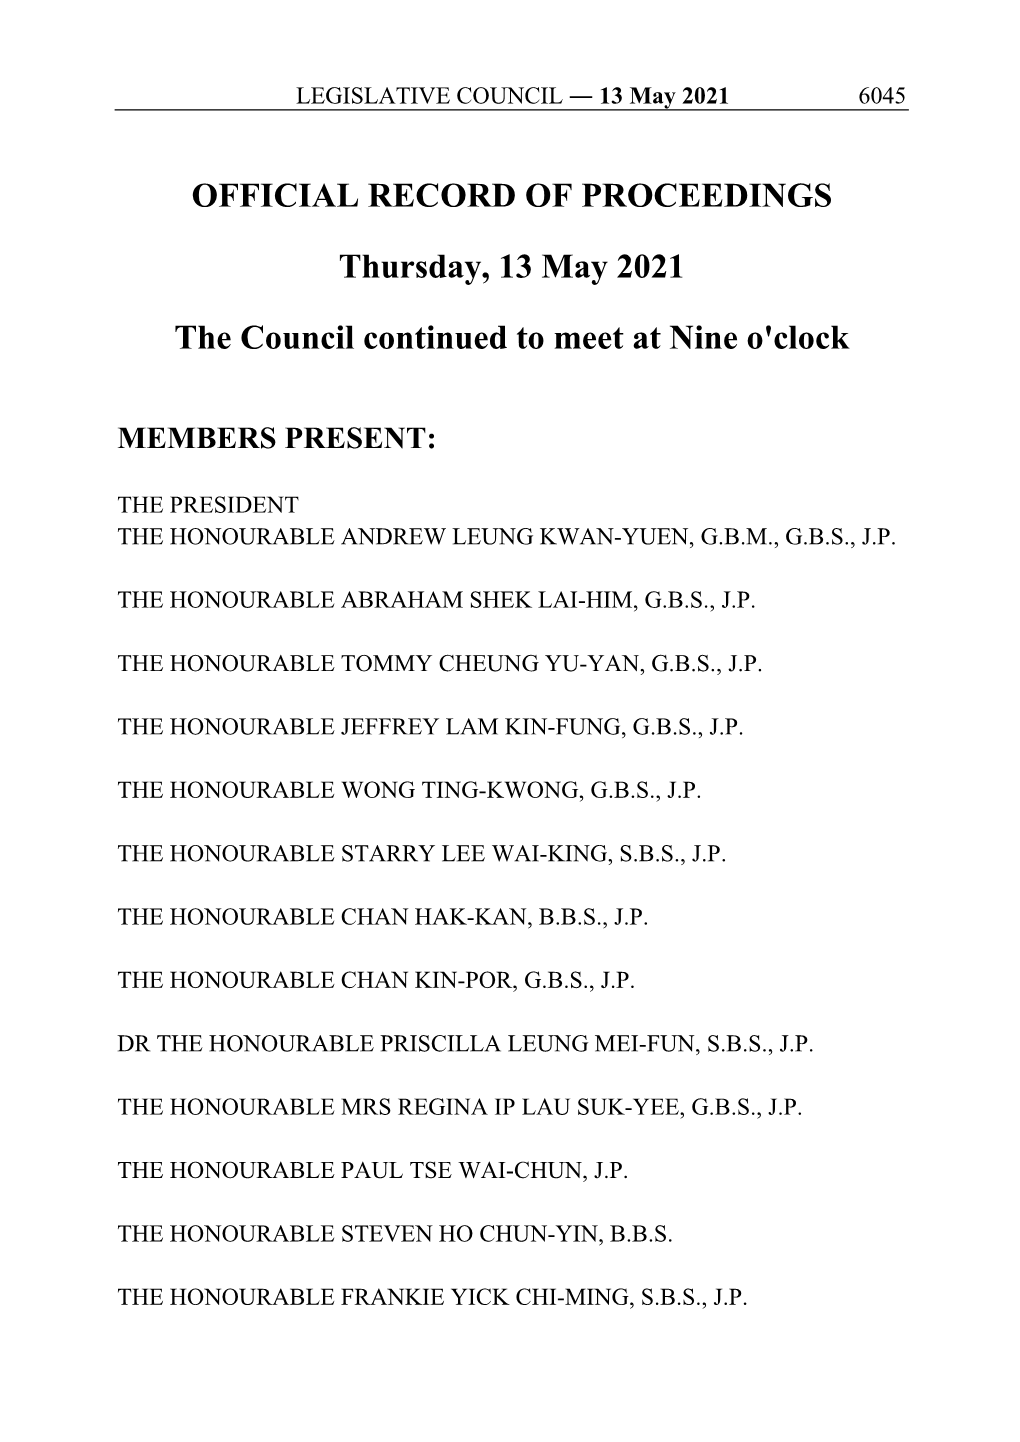 OFFICIAL RECORD of PROCEEDINGS Thursday, 13 May